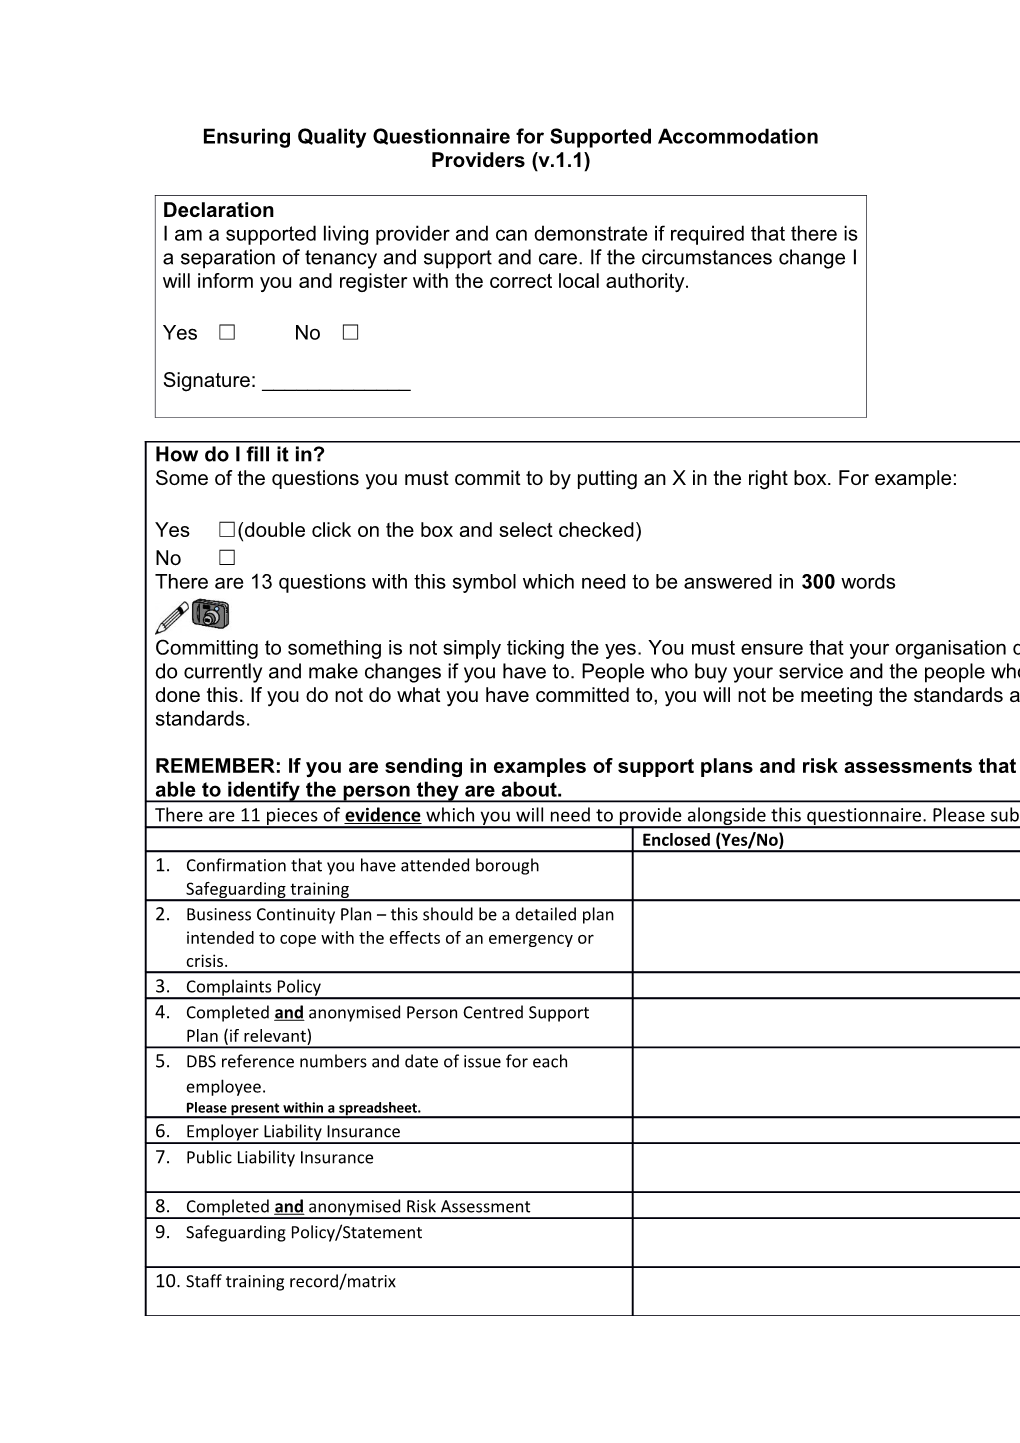 Ensuring Quality Questionnaire for Supported Accommodation Providers (V.1.1)